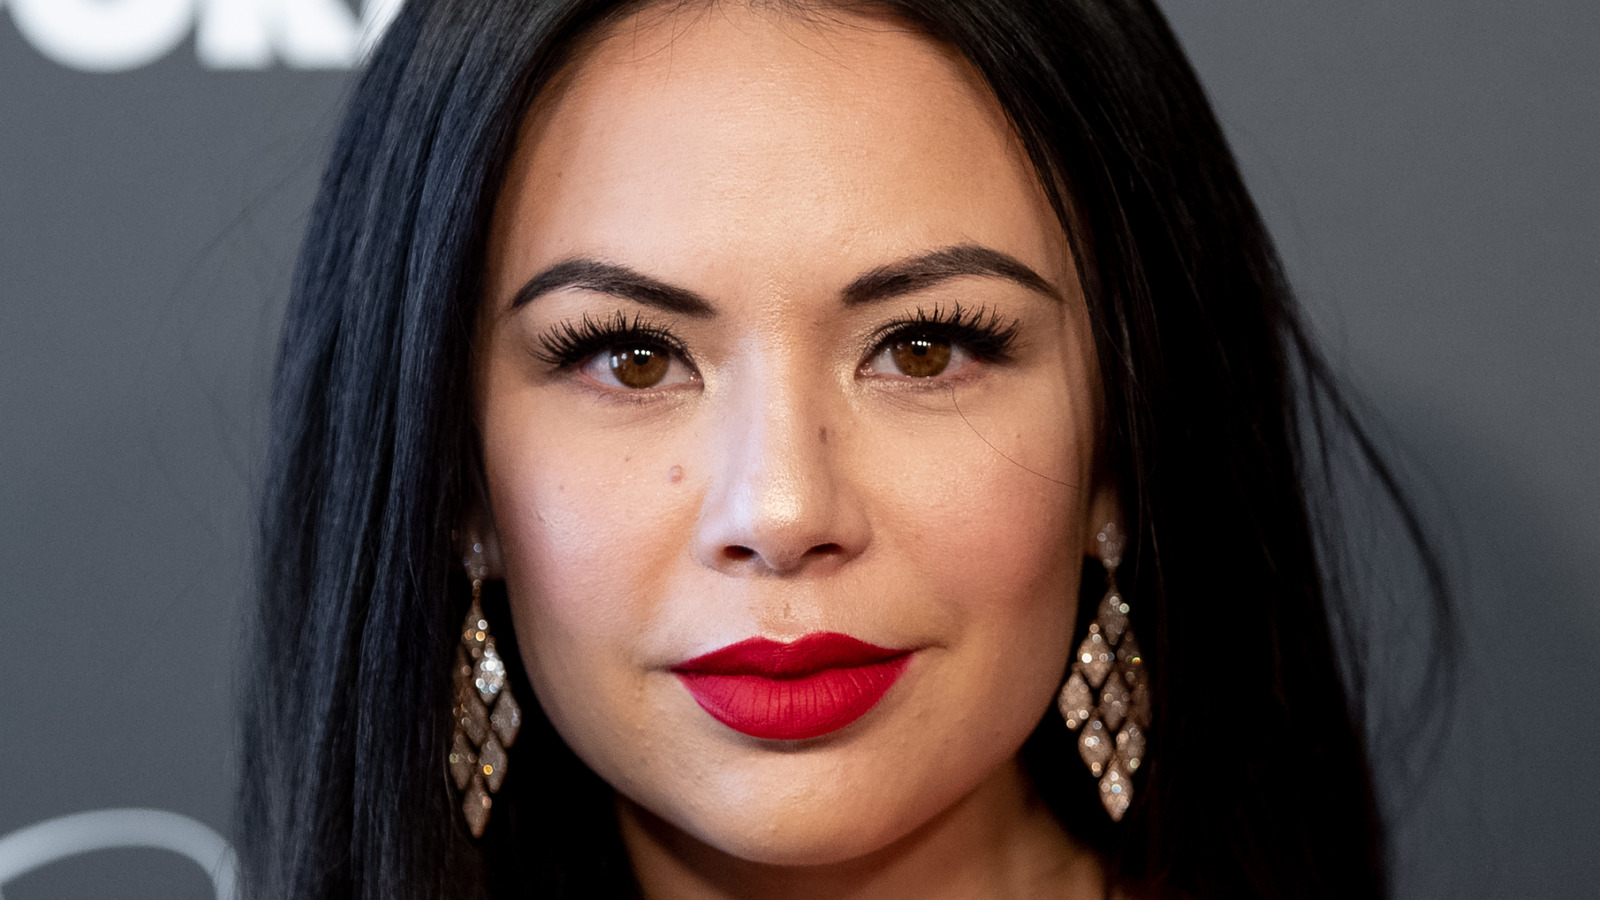 8. Janel Parrish's Blue Hair: Tips and Tricks - wide 7